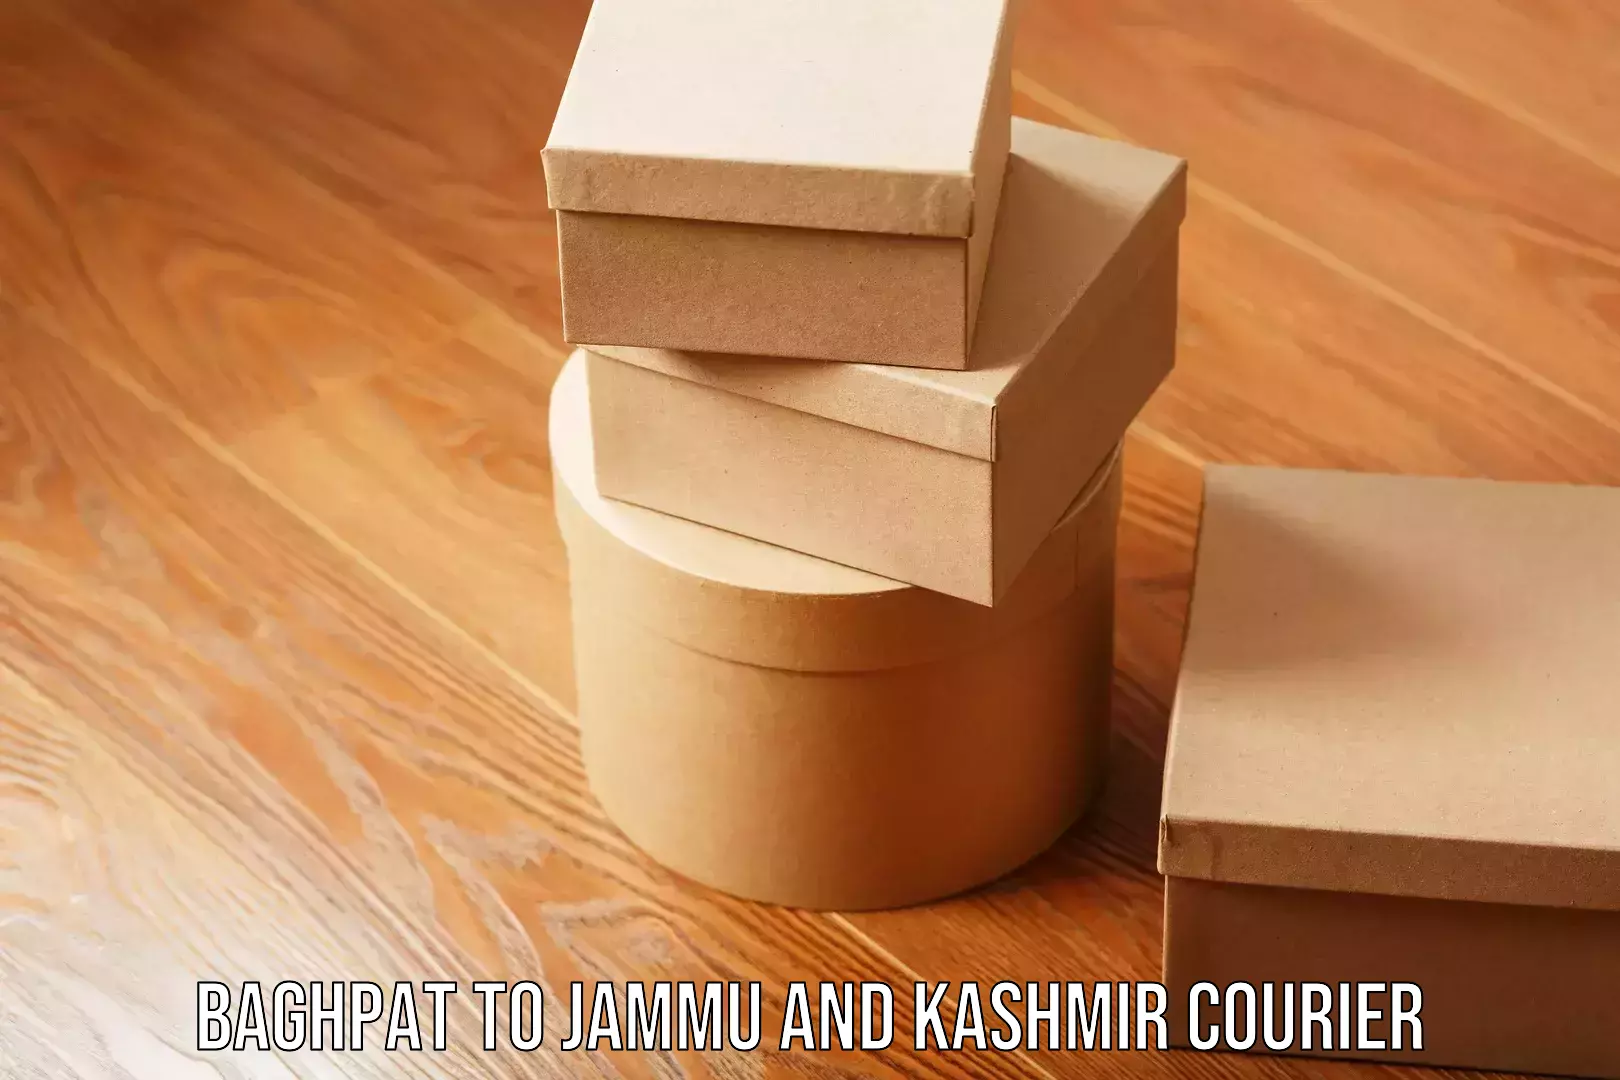 Advanced shipping technology in Baghpat to Jammu and Kashmir